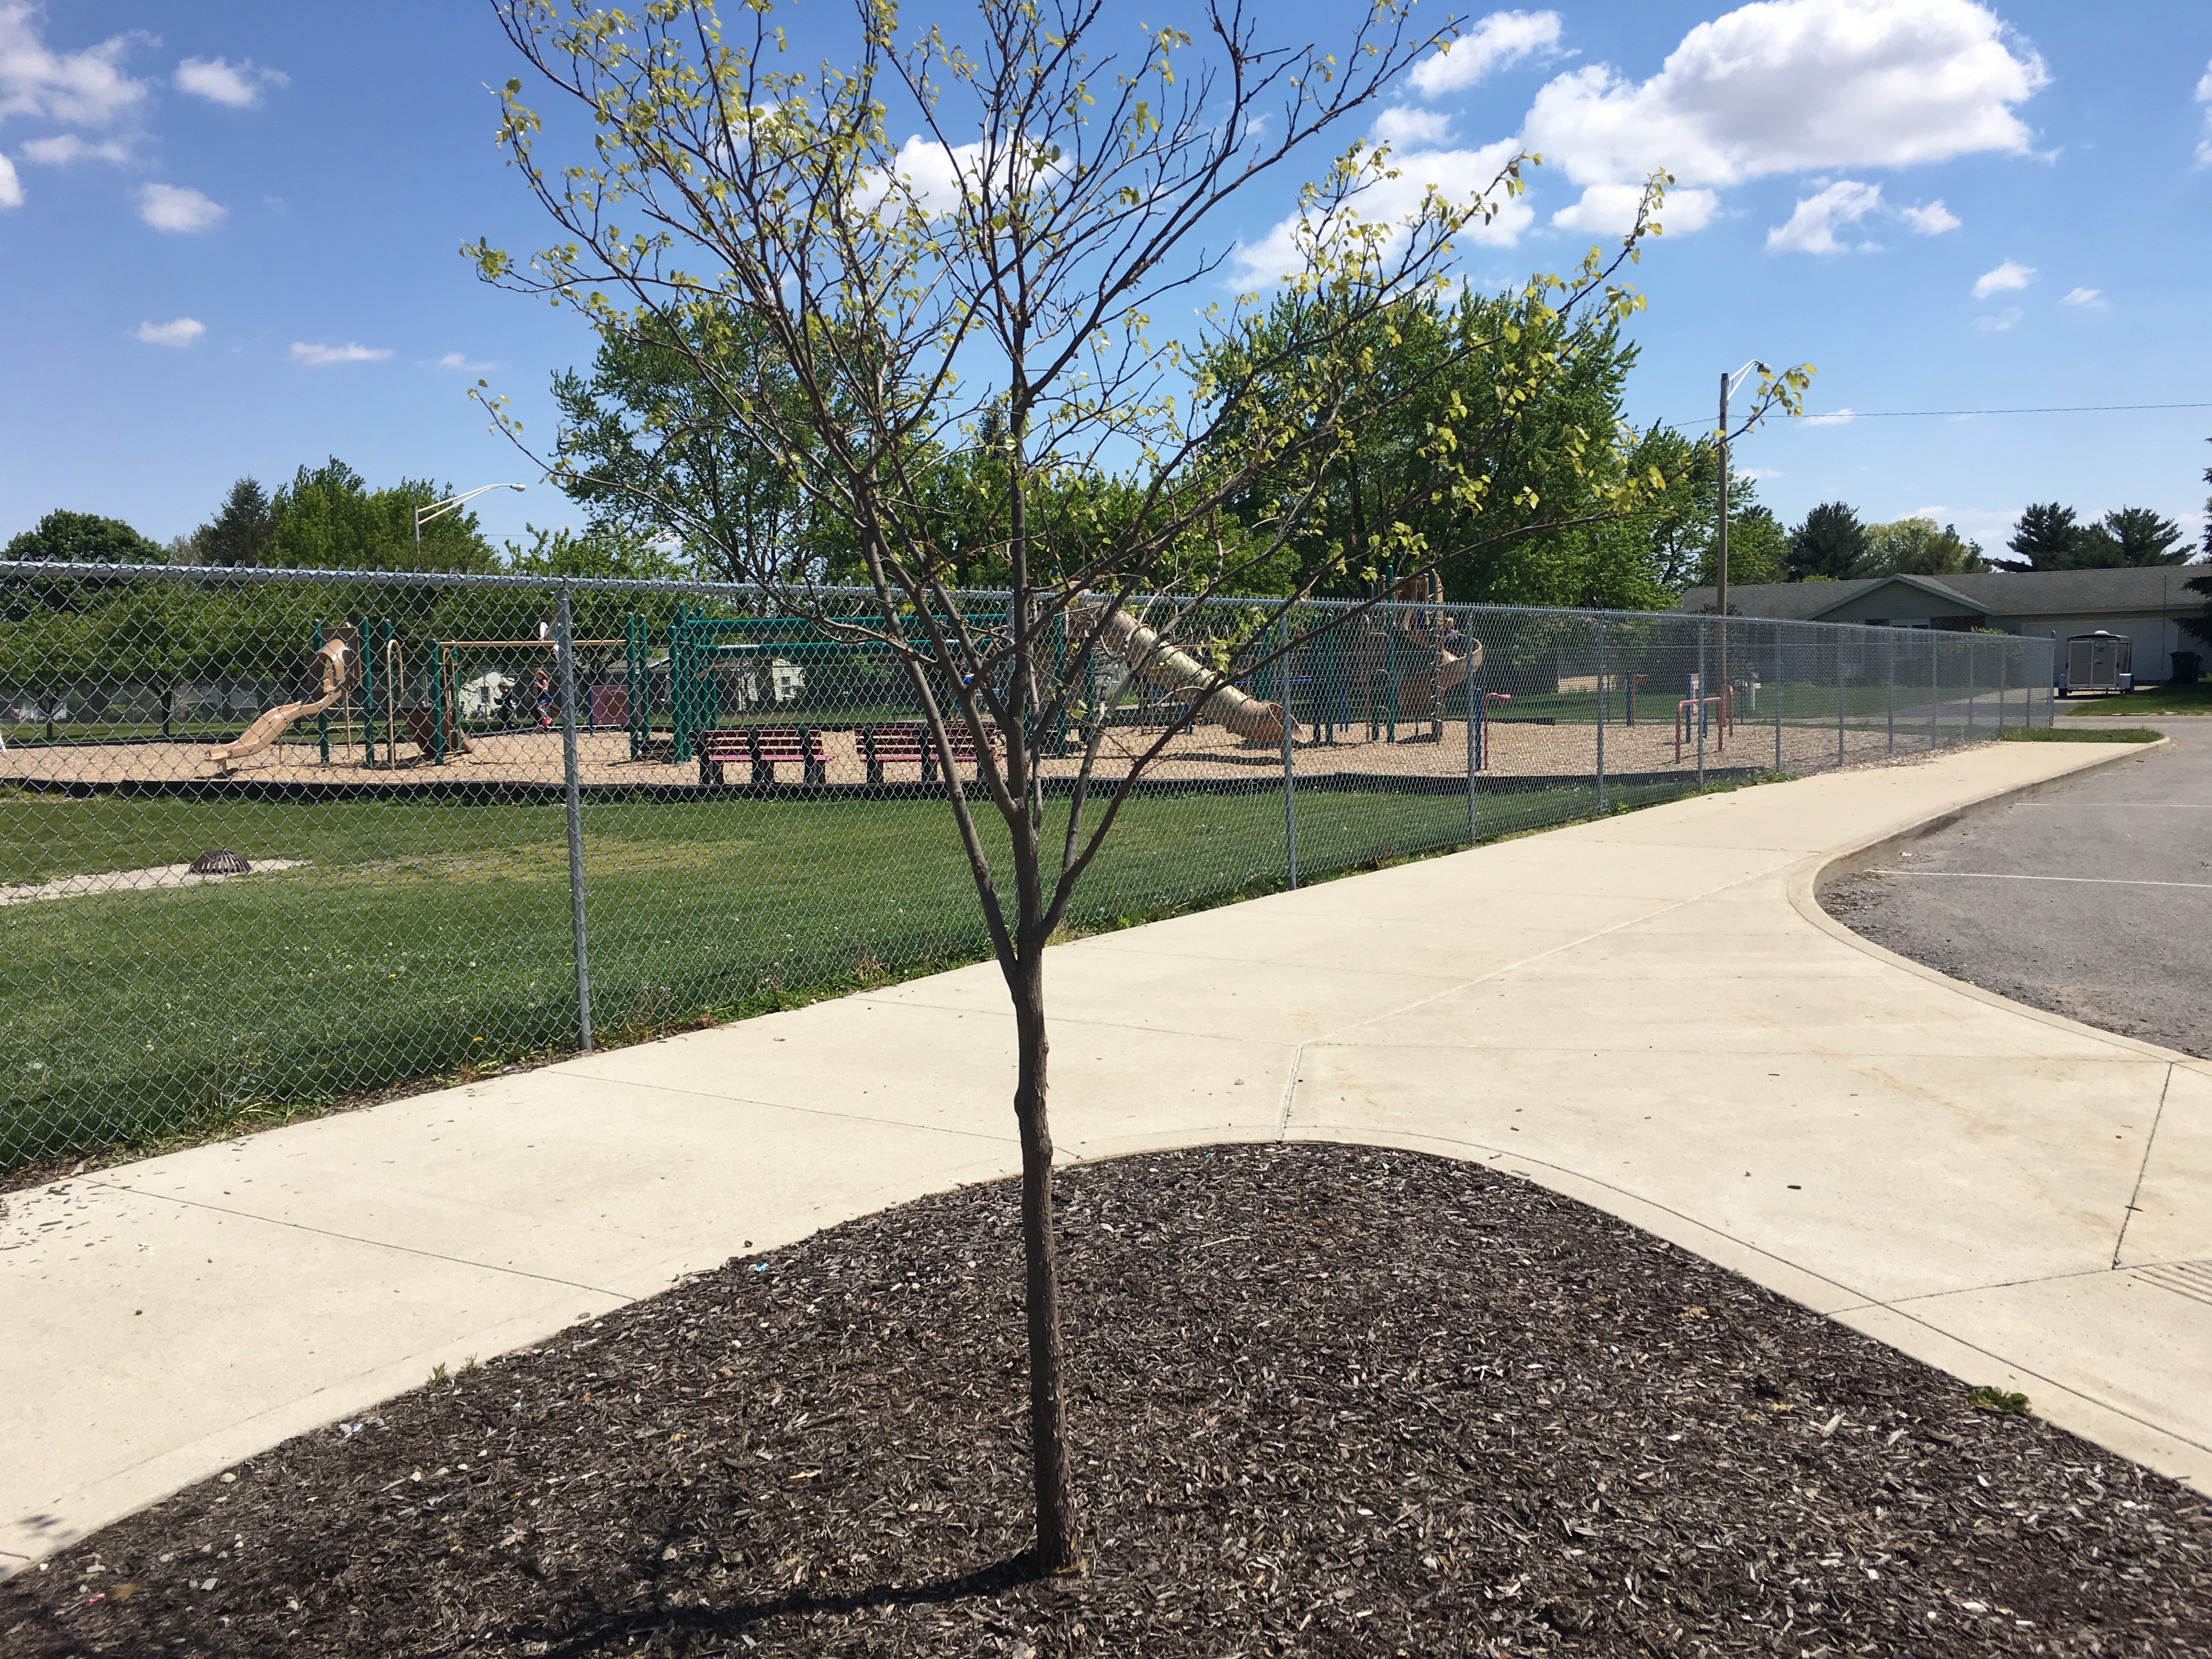 tree planted in Mr. Pickell's honor